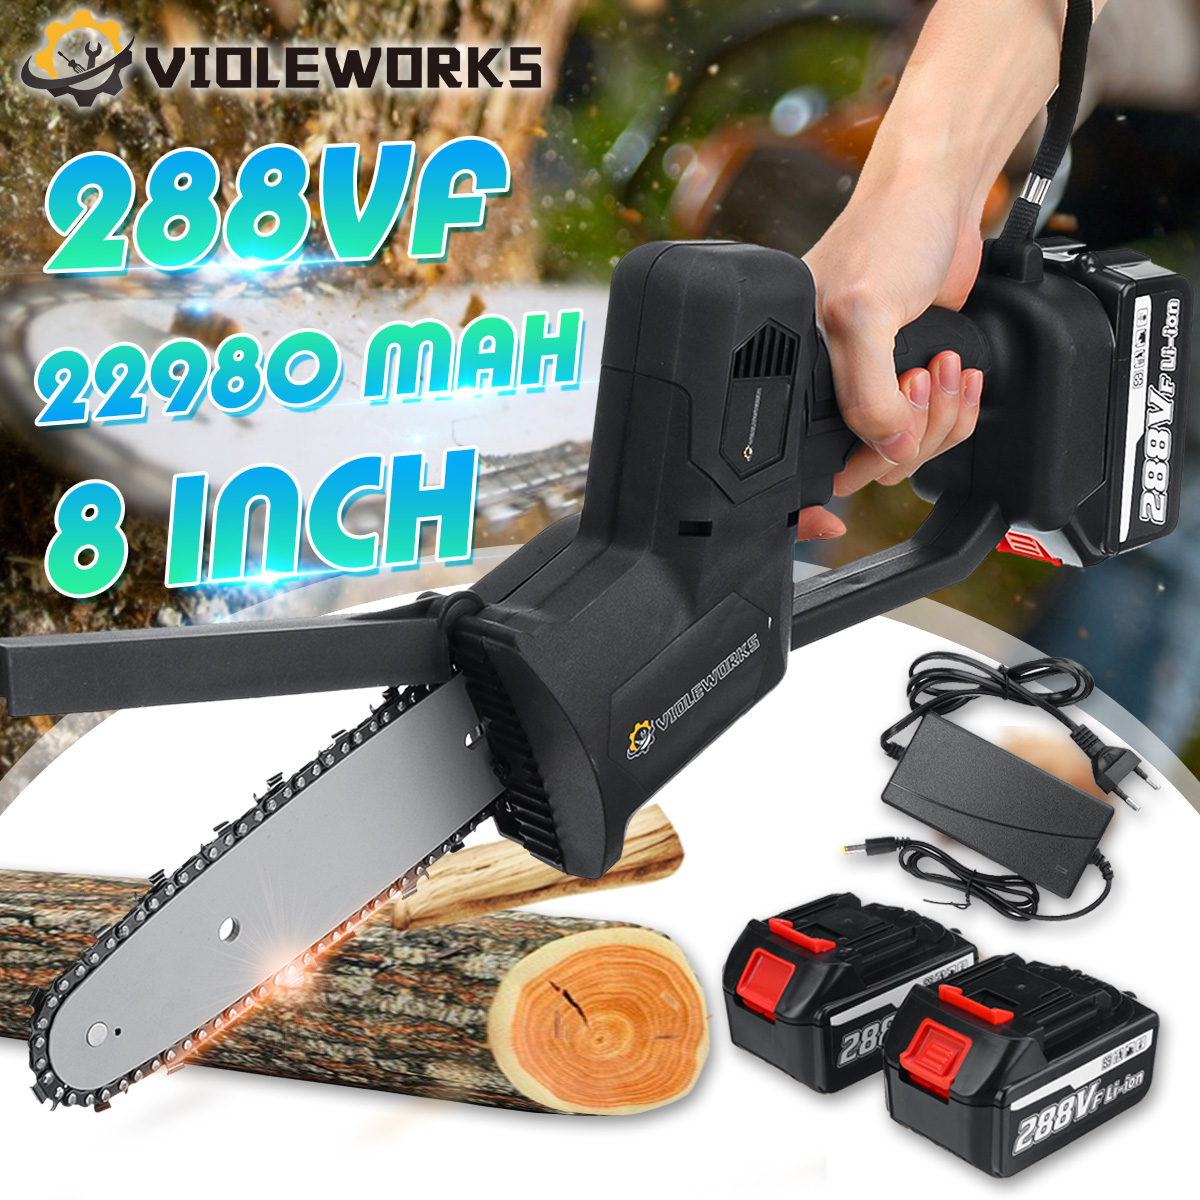 VIOLEWORKS-288VF-Cordless-Electric-Chain-Saw-One-Hand-Saw-Woodworking-Tool-W-None1pc2pcs-Battery-Als-1829028-2